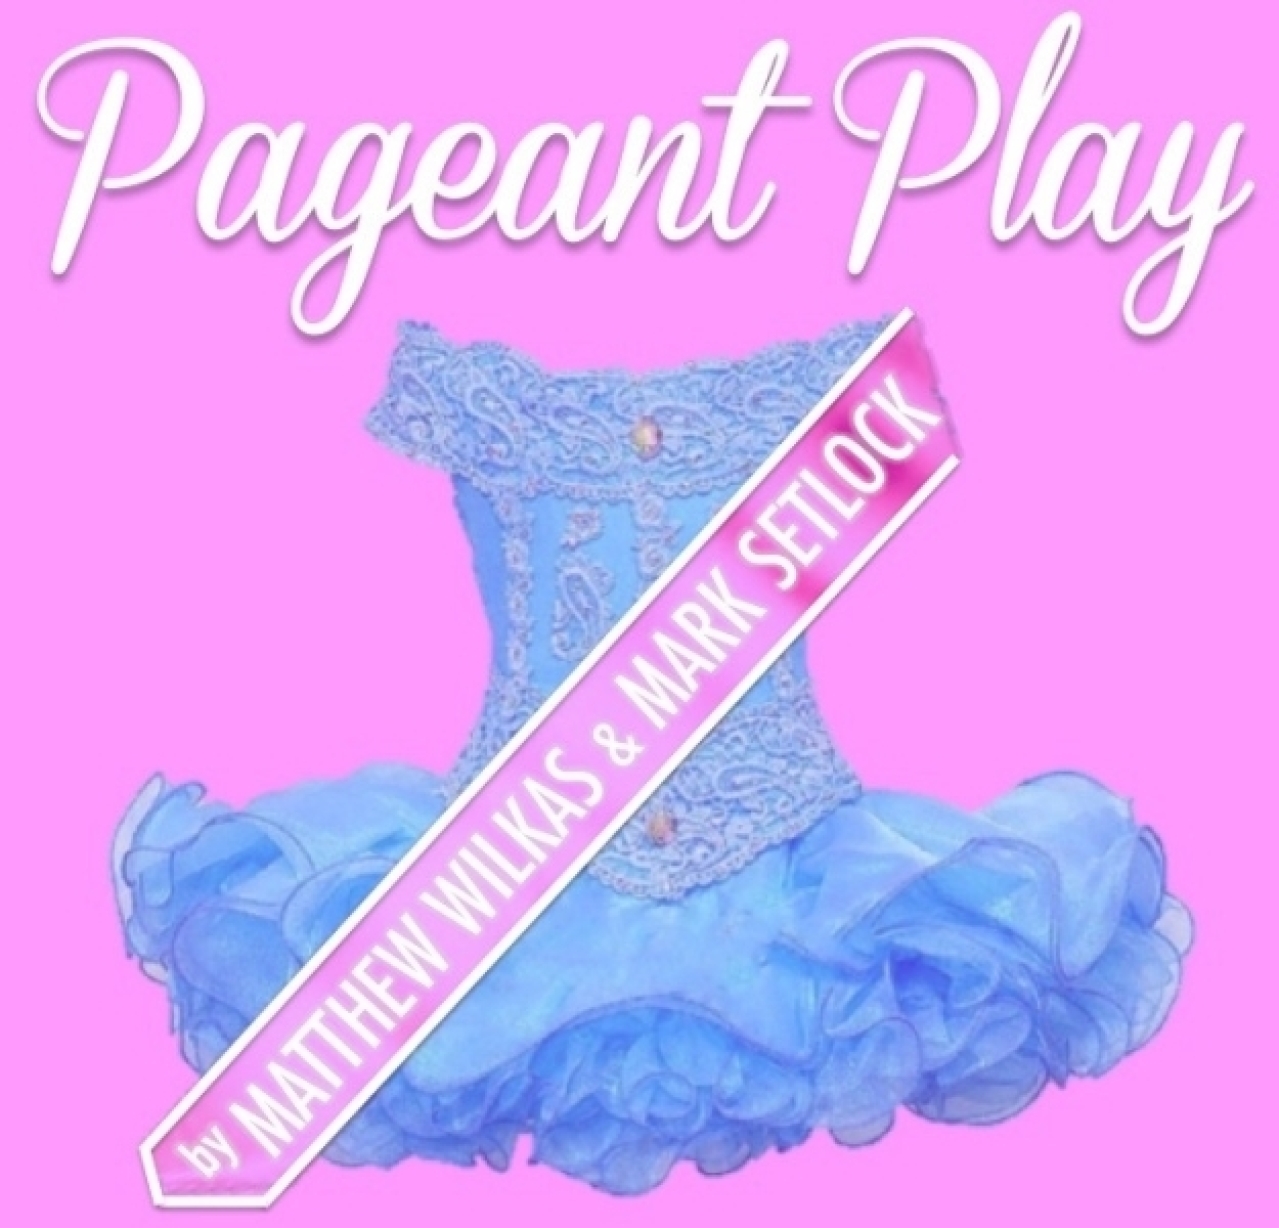 pageant play logo 64239